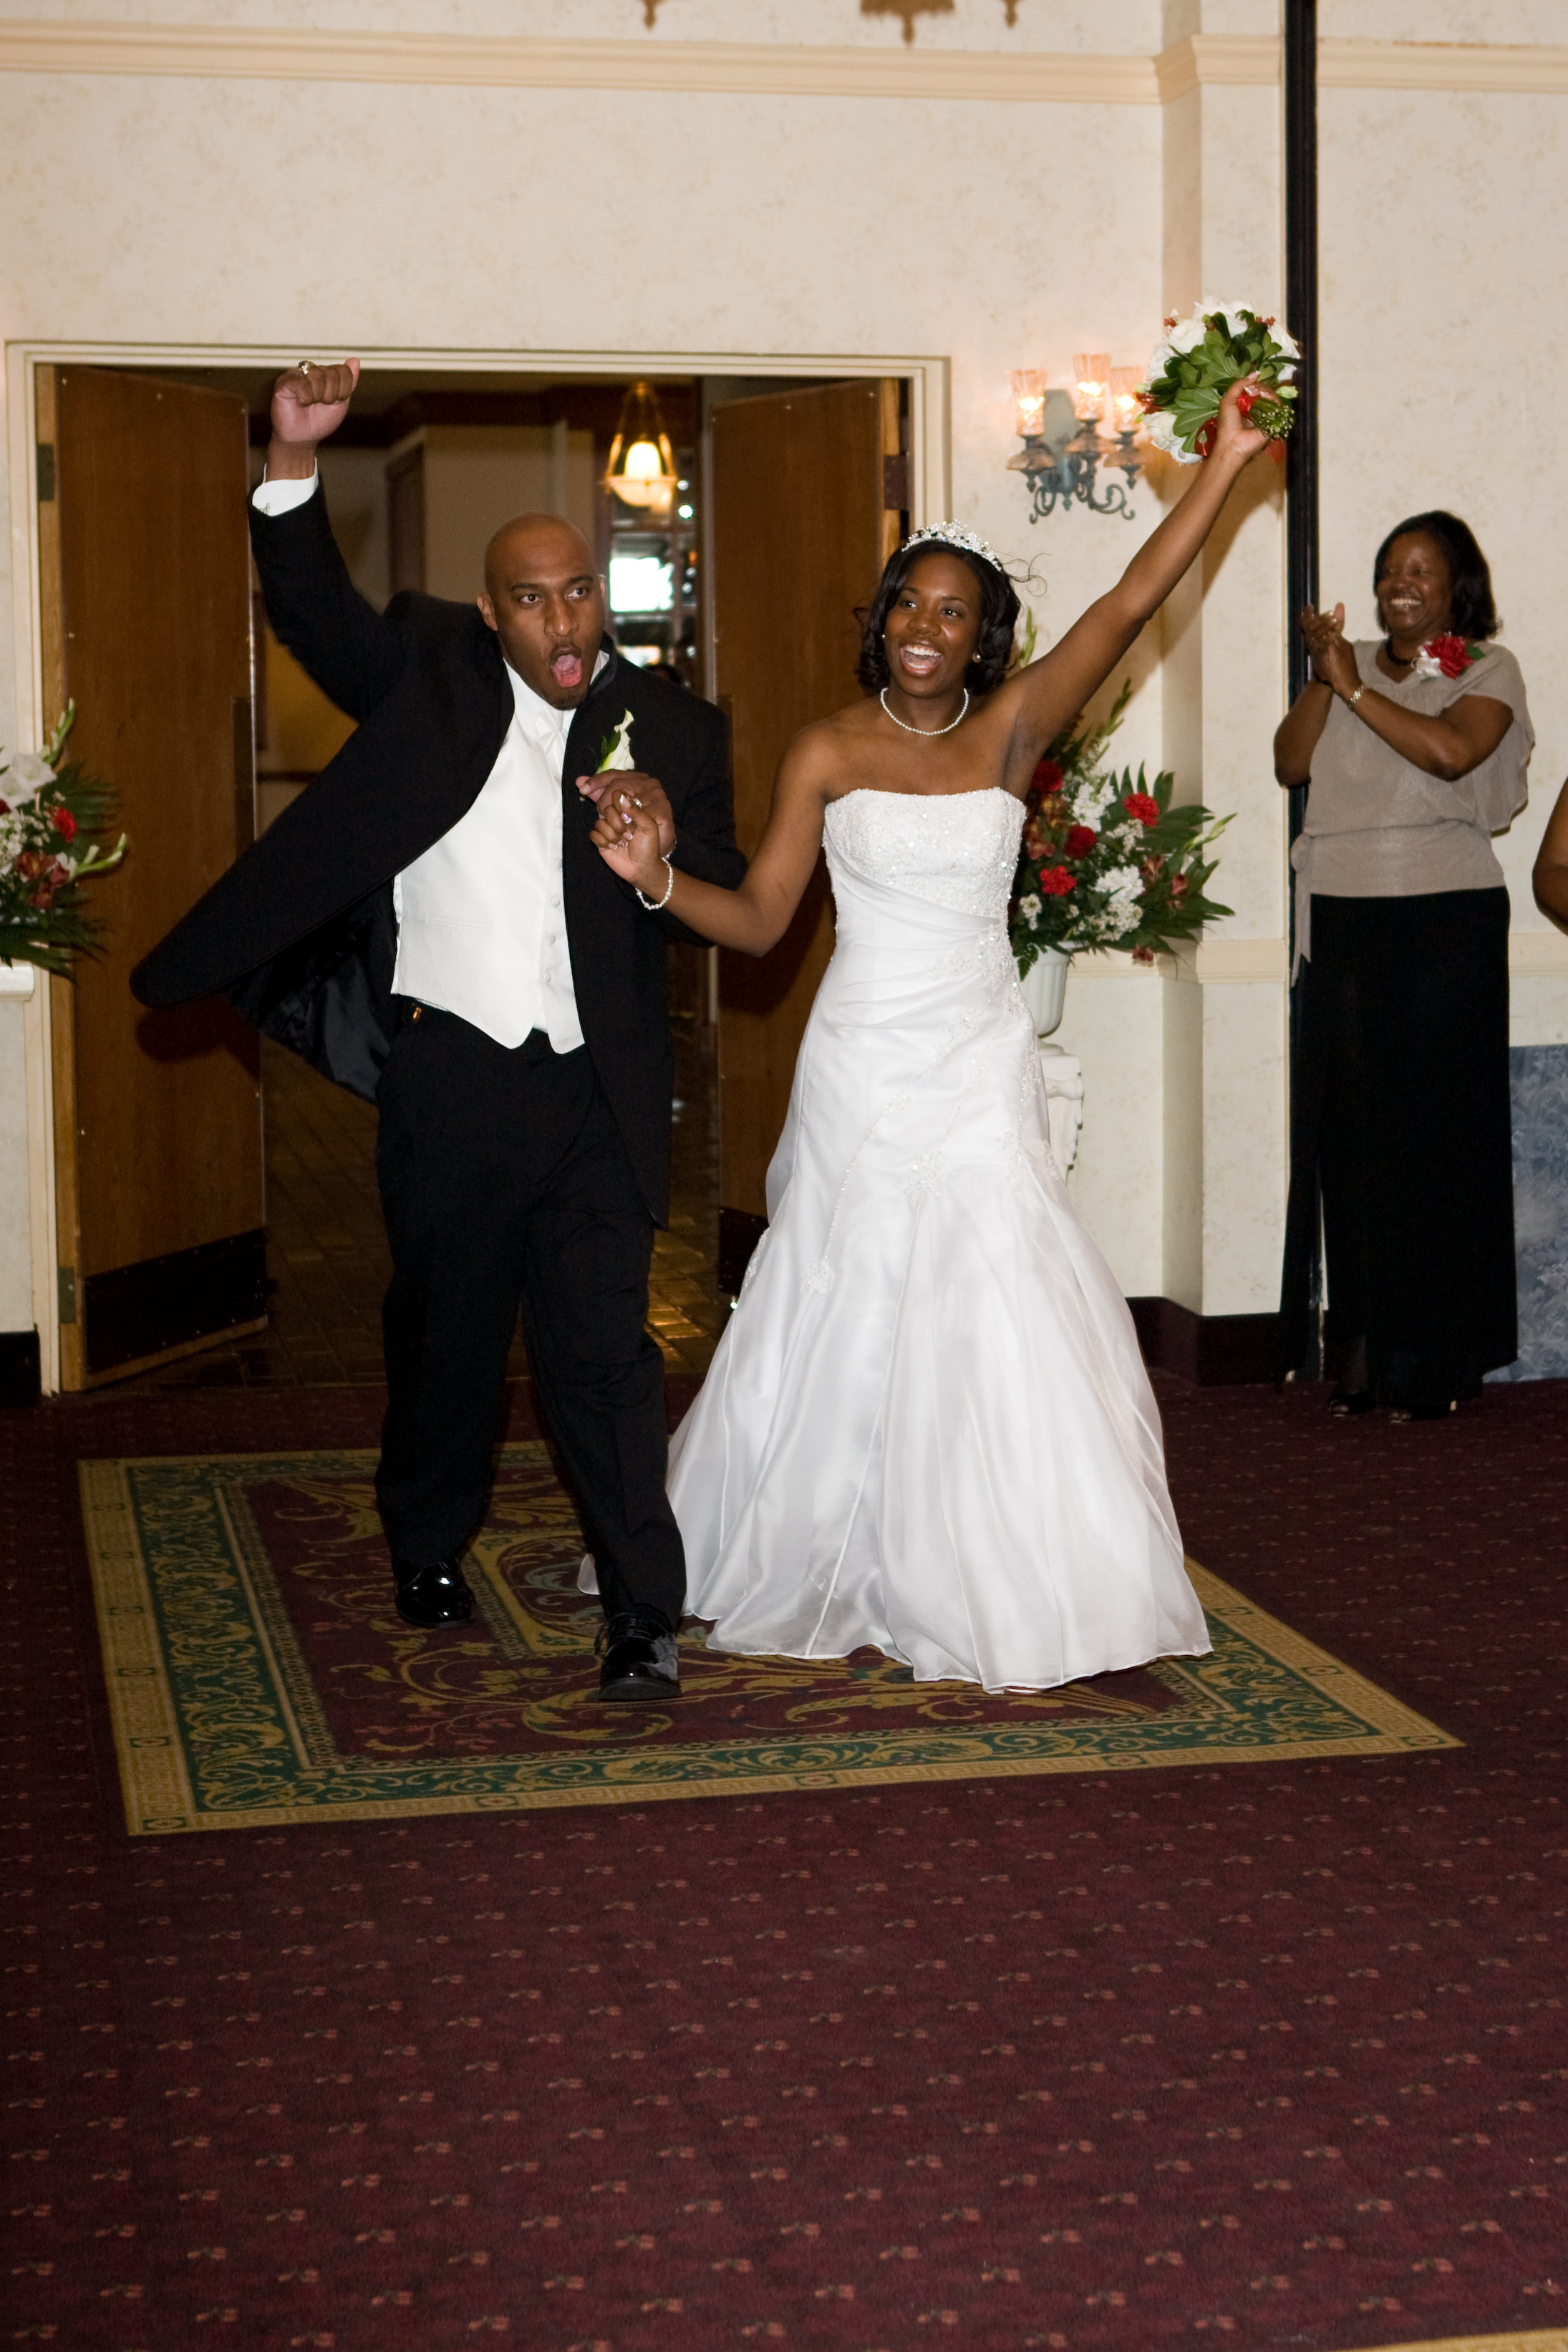 Image of the young couple walking into their reception holding hands and each raising an arm in a celebratory way.